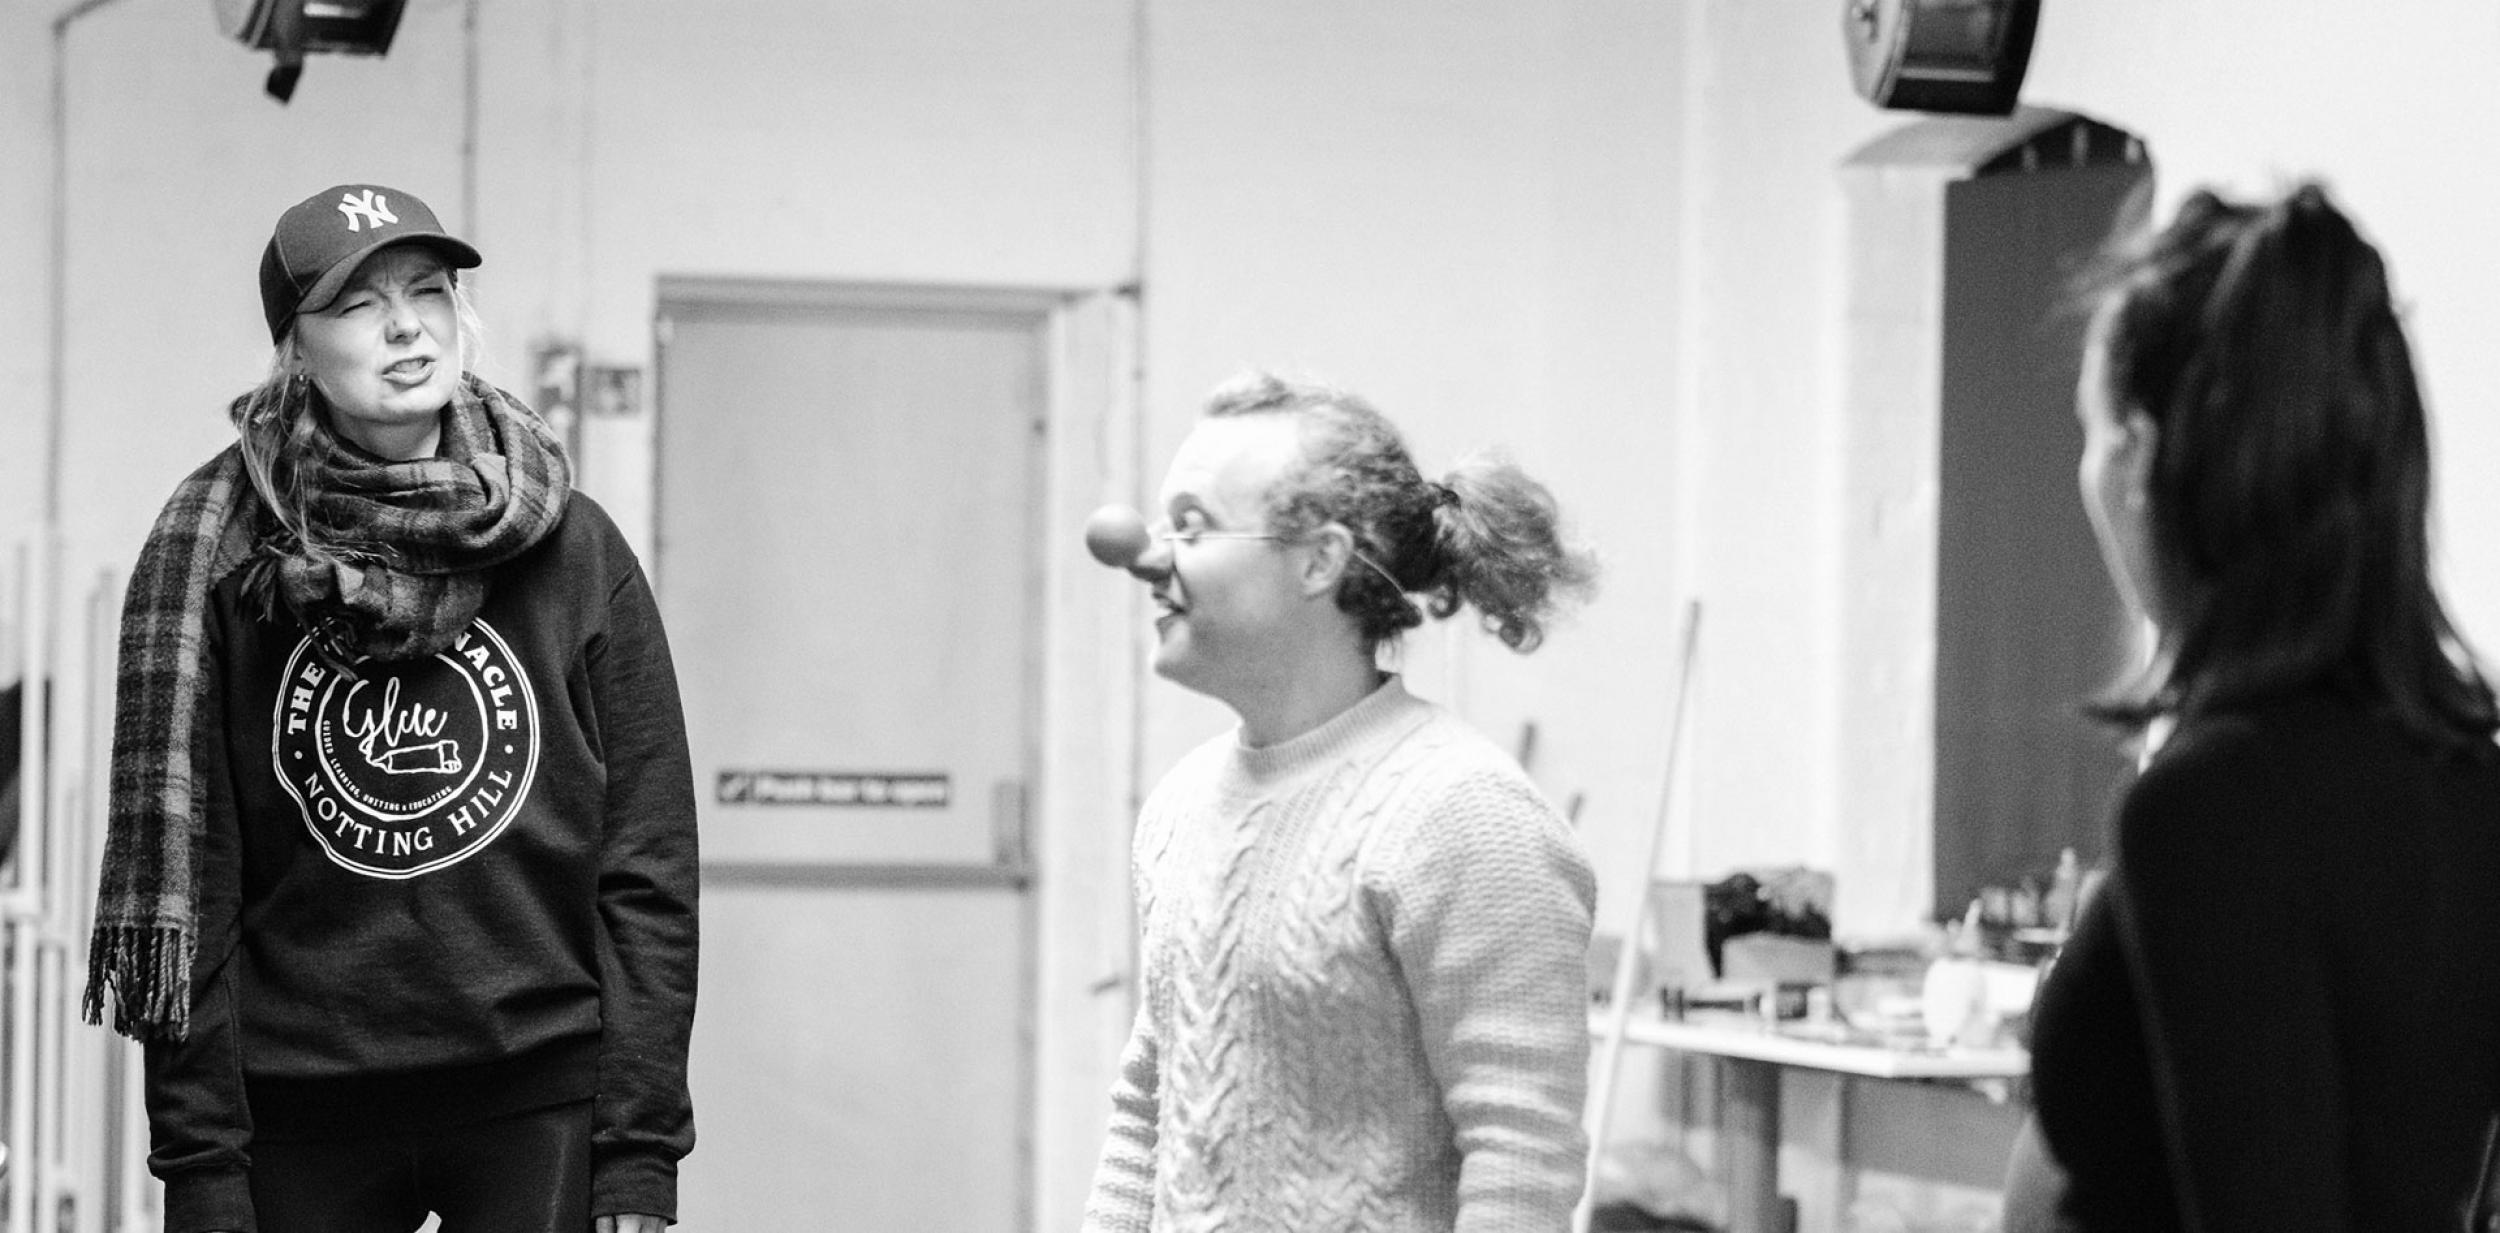 actors rehearsing for the panto